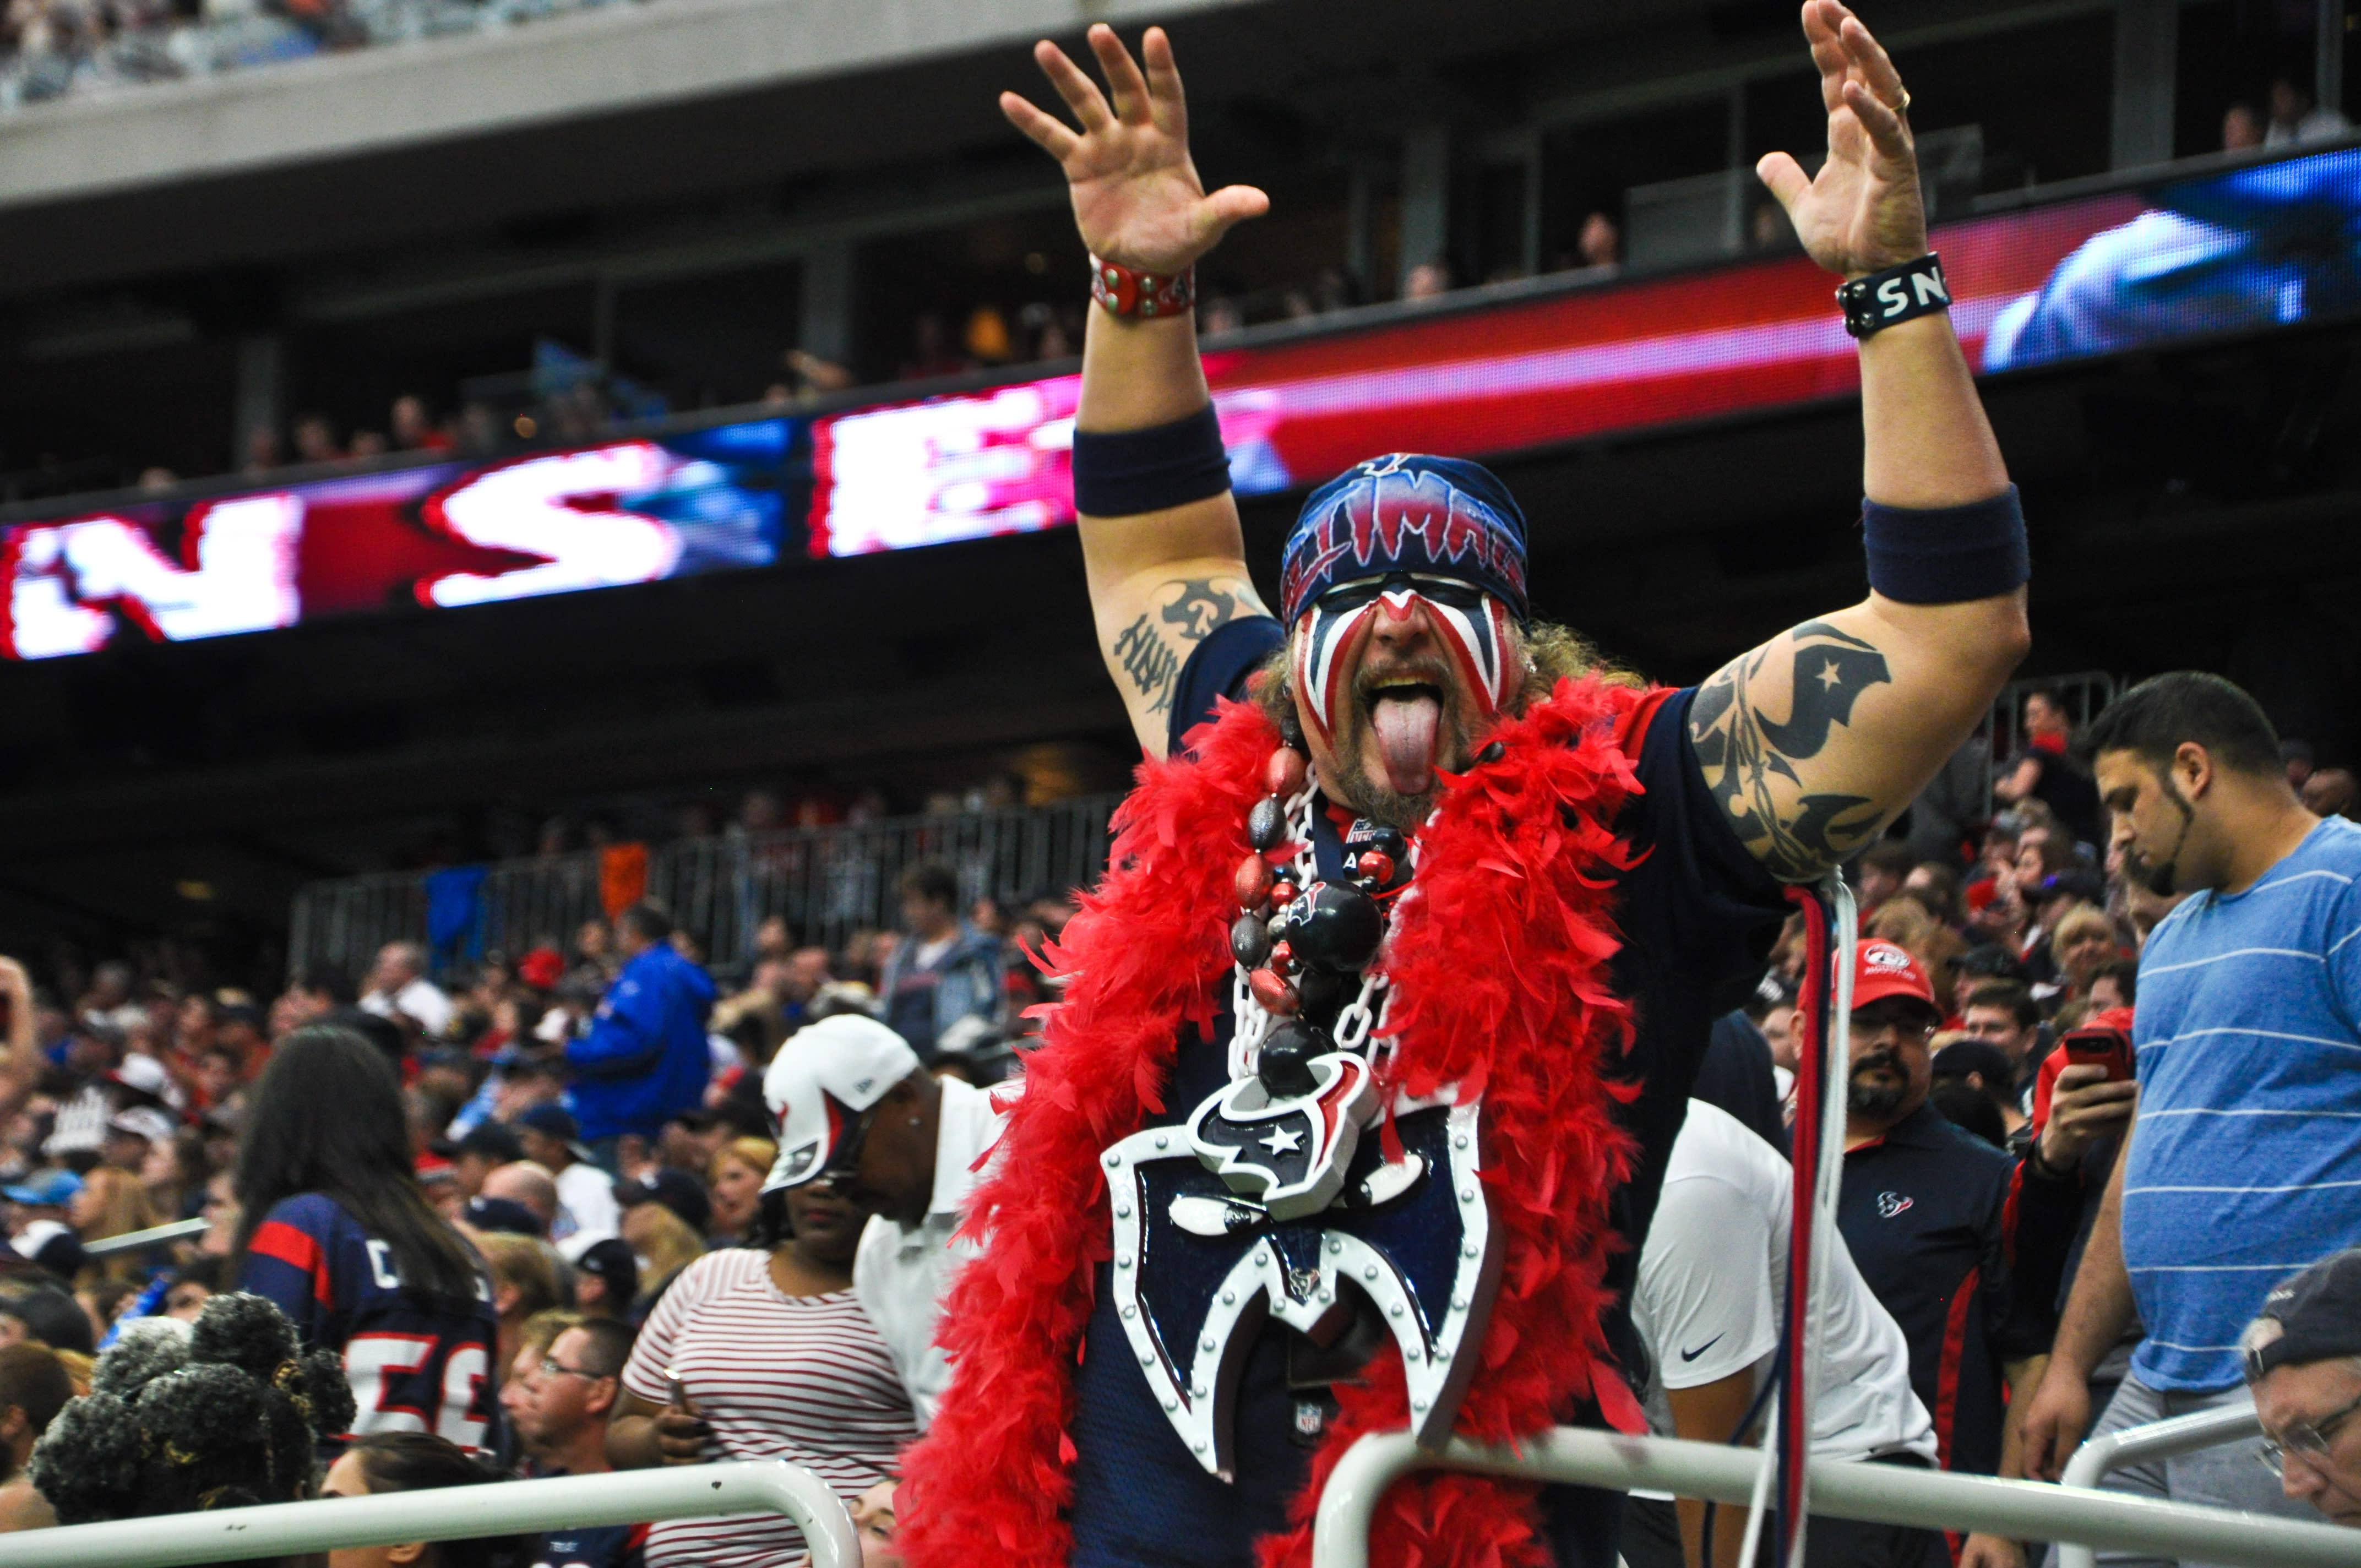 Texans Fan at Game